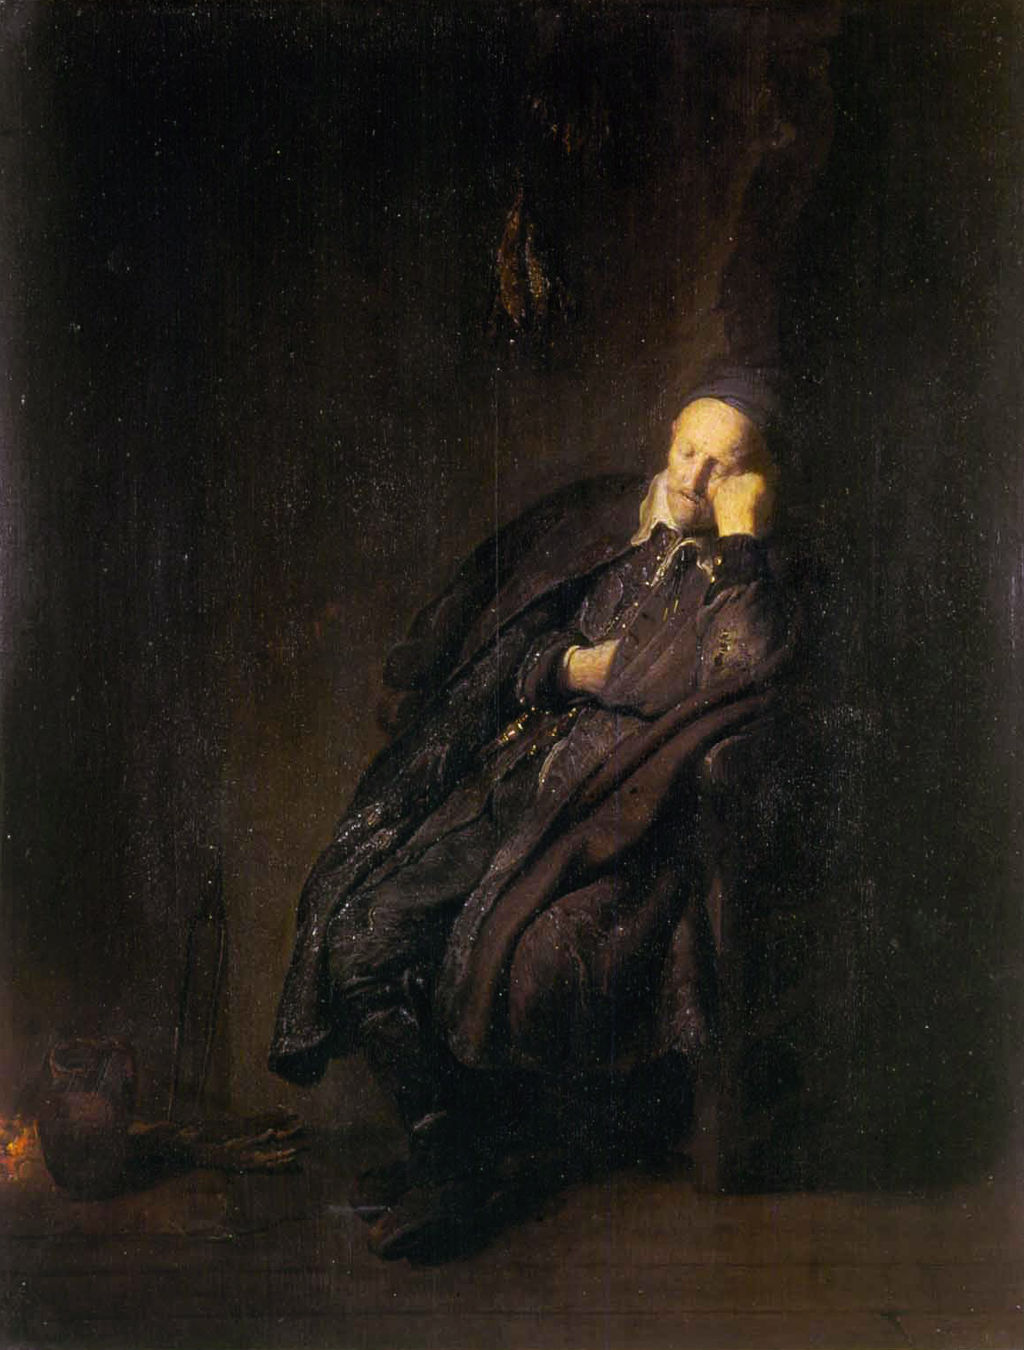 An Old Man Asleep by the Fire Painting by Rembrandt Reproduction for Sale